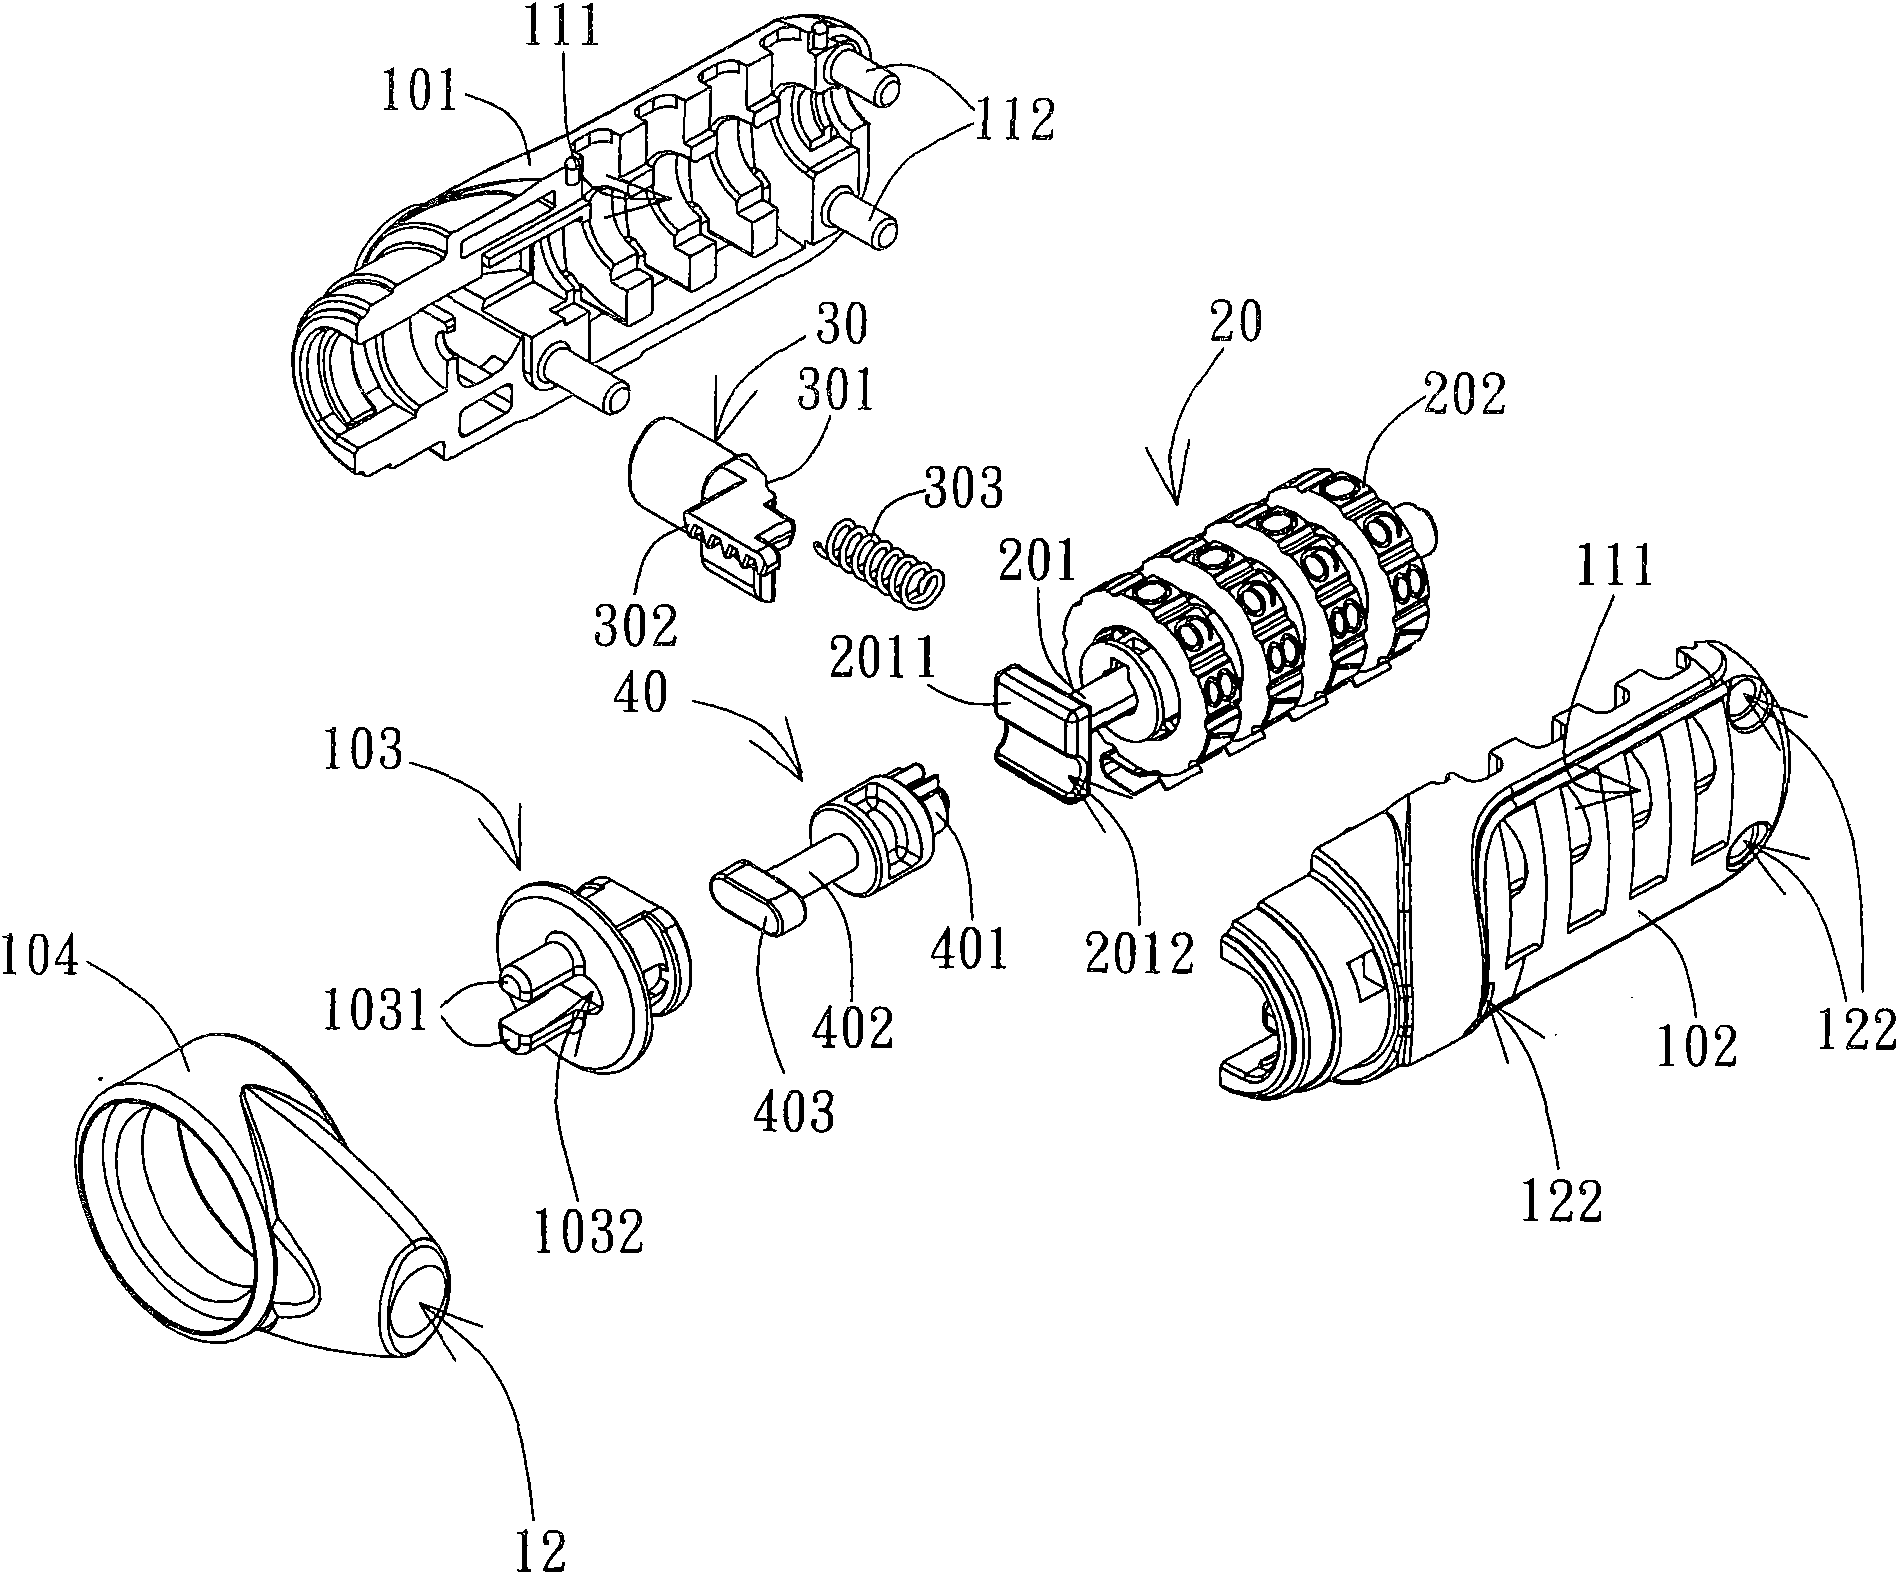 Lock structure for an electronic device